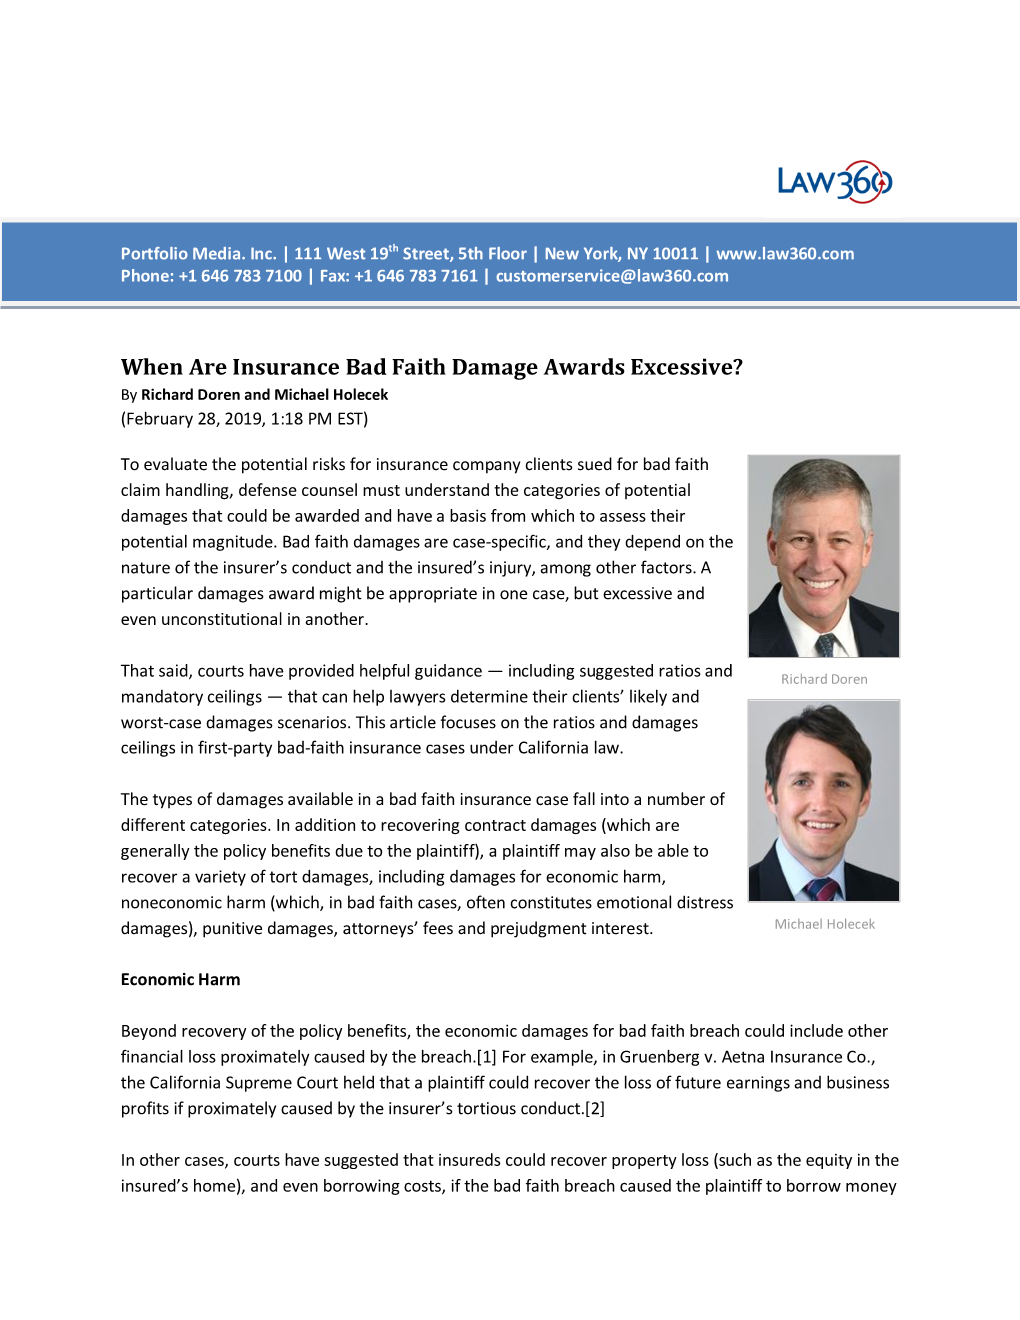 When Are Insurance Bad Faith Damage Awards Excessive? by Richard Doren and Michael Holecek (February 28, 2019, 1:18 PM EST)